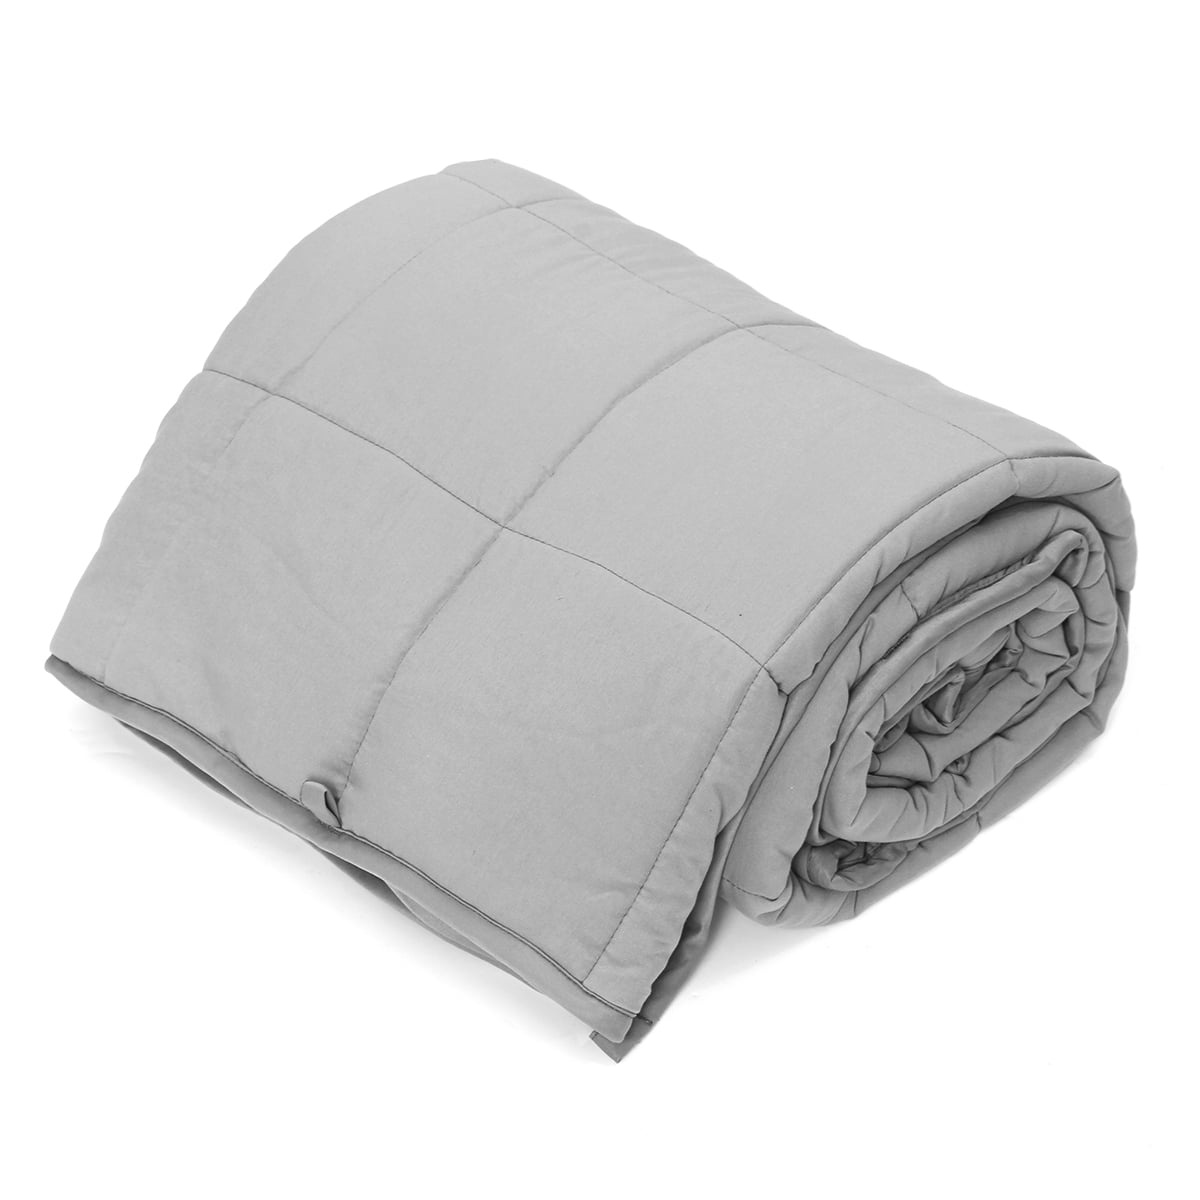 Weighted Blanket (60" x80", 25 lbs) 100% Cotton Material with Glass